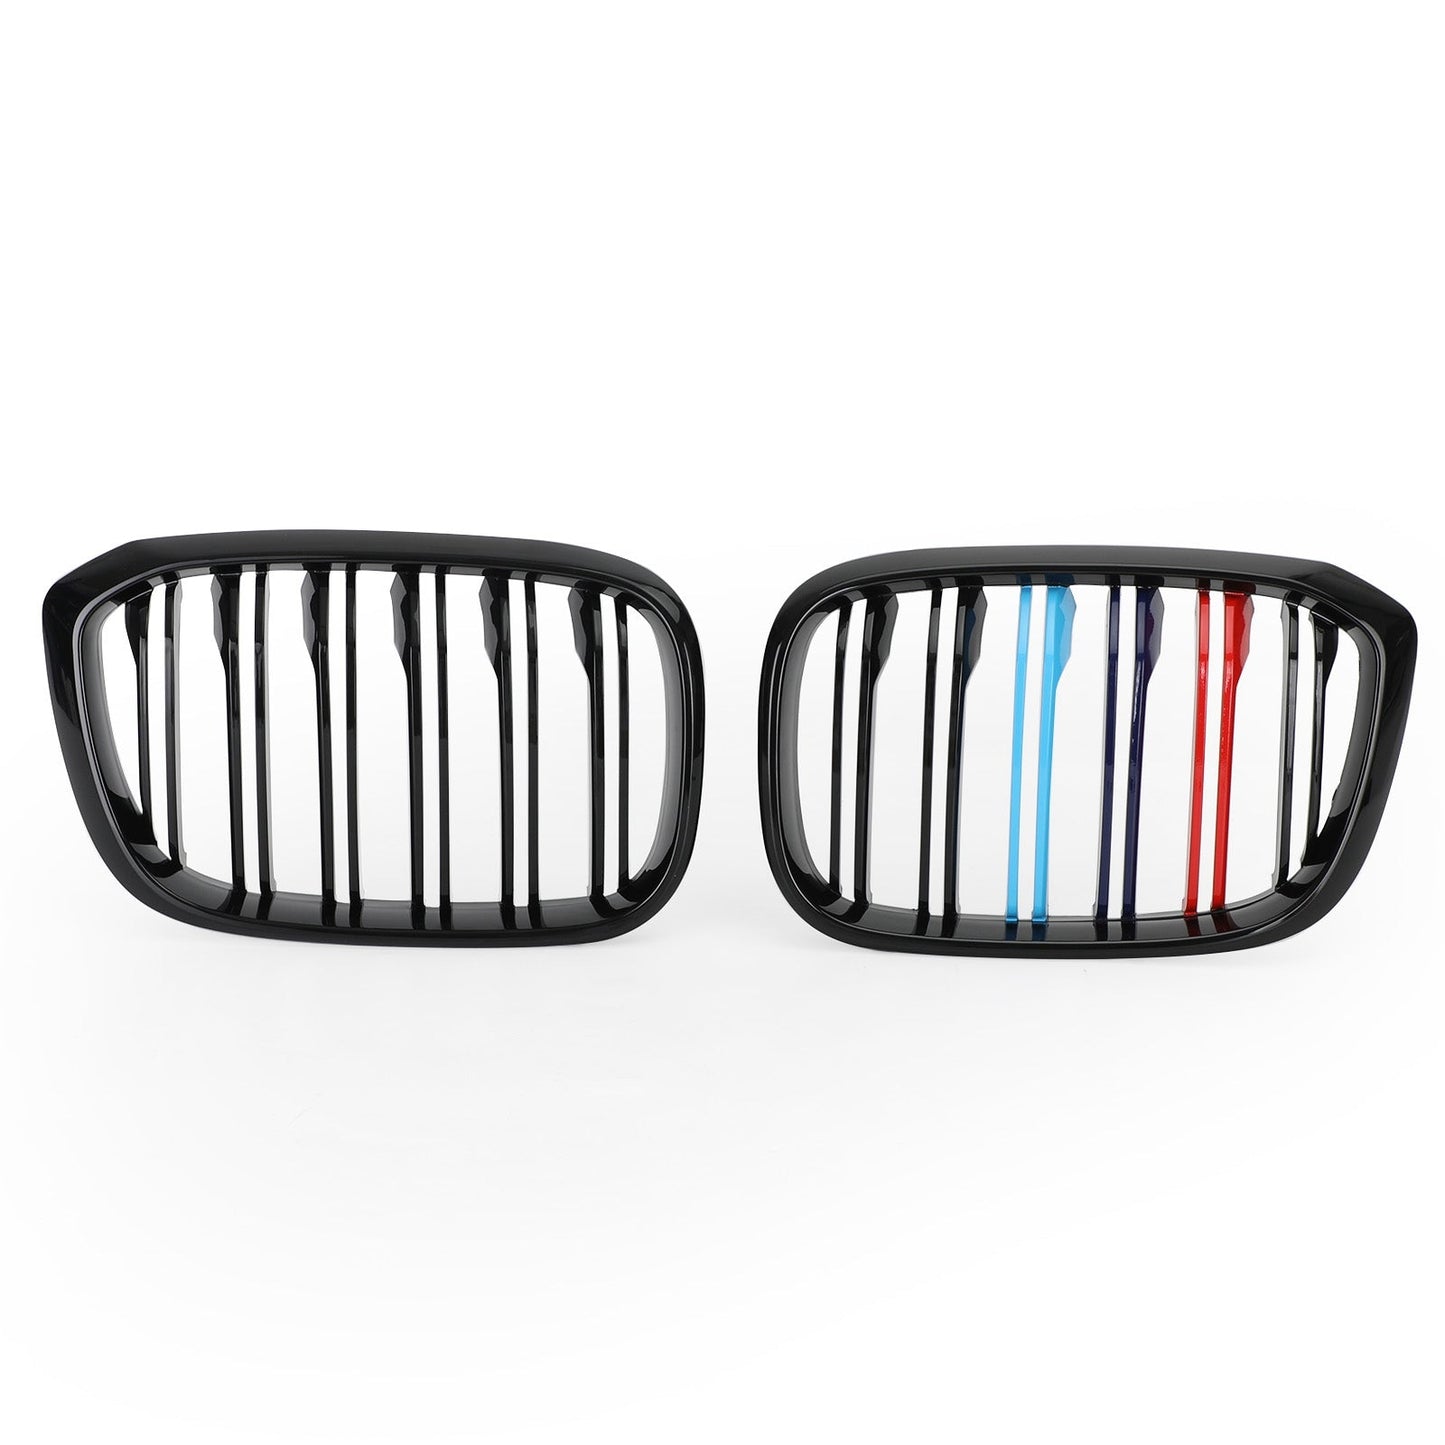 2PCS M-Color Kidney Grill Grille 51138469959 fit BMW G01 X3 G02 X4 Gloss Black